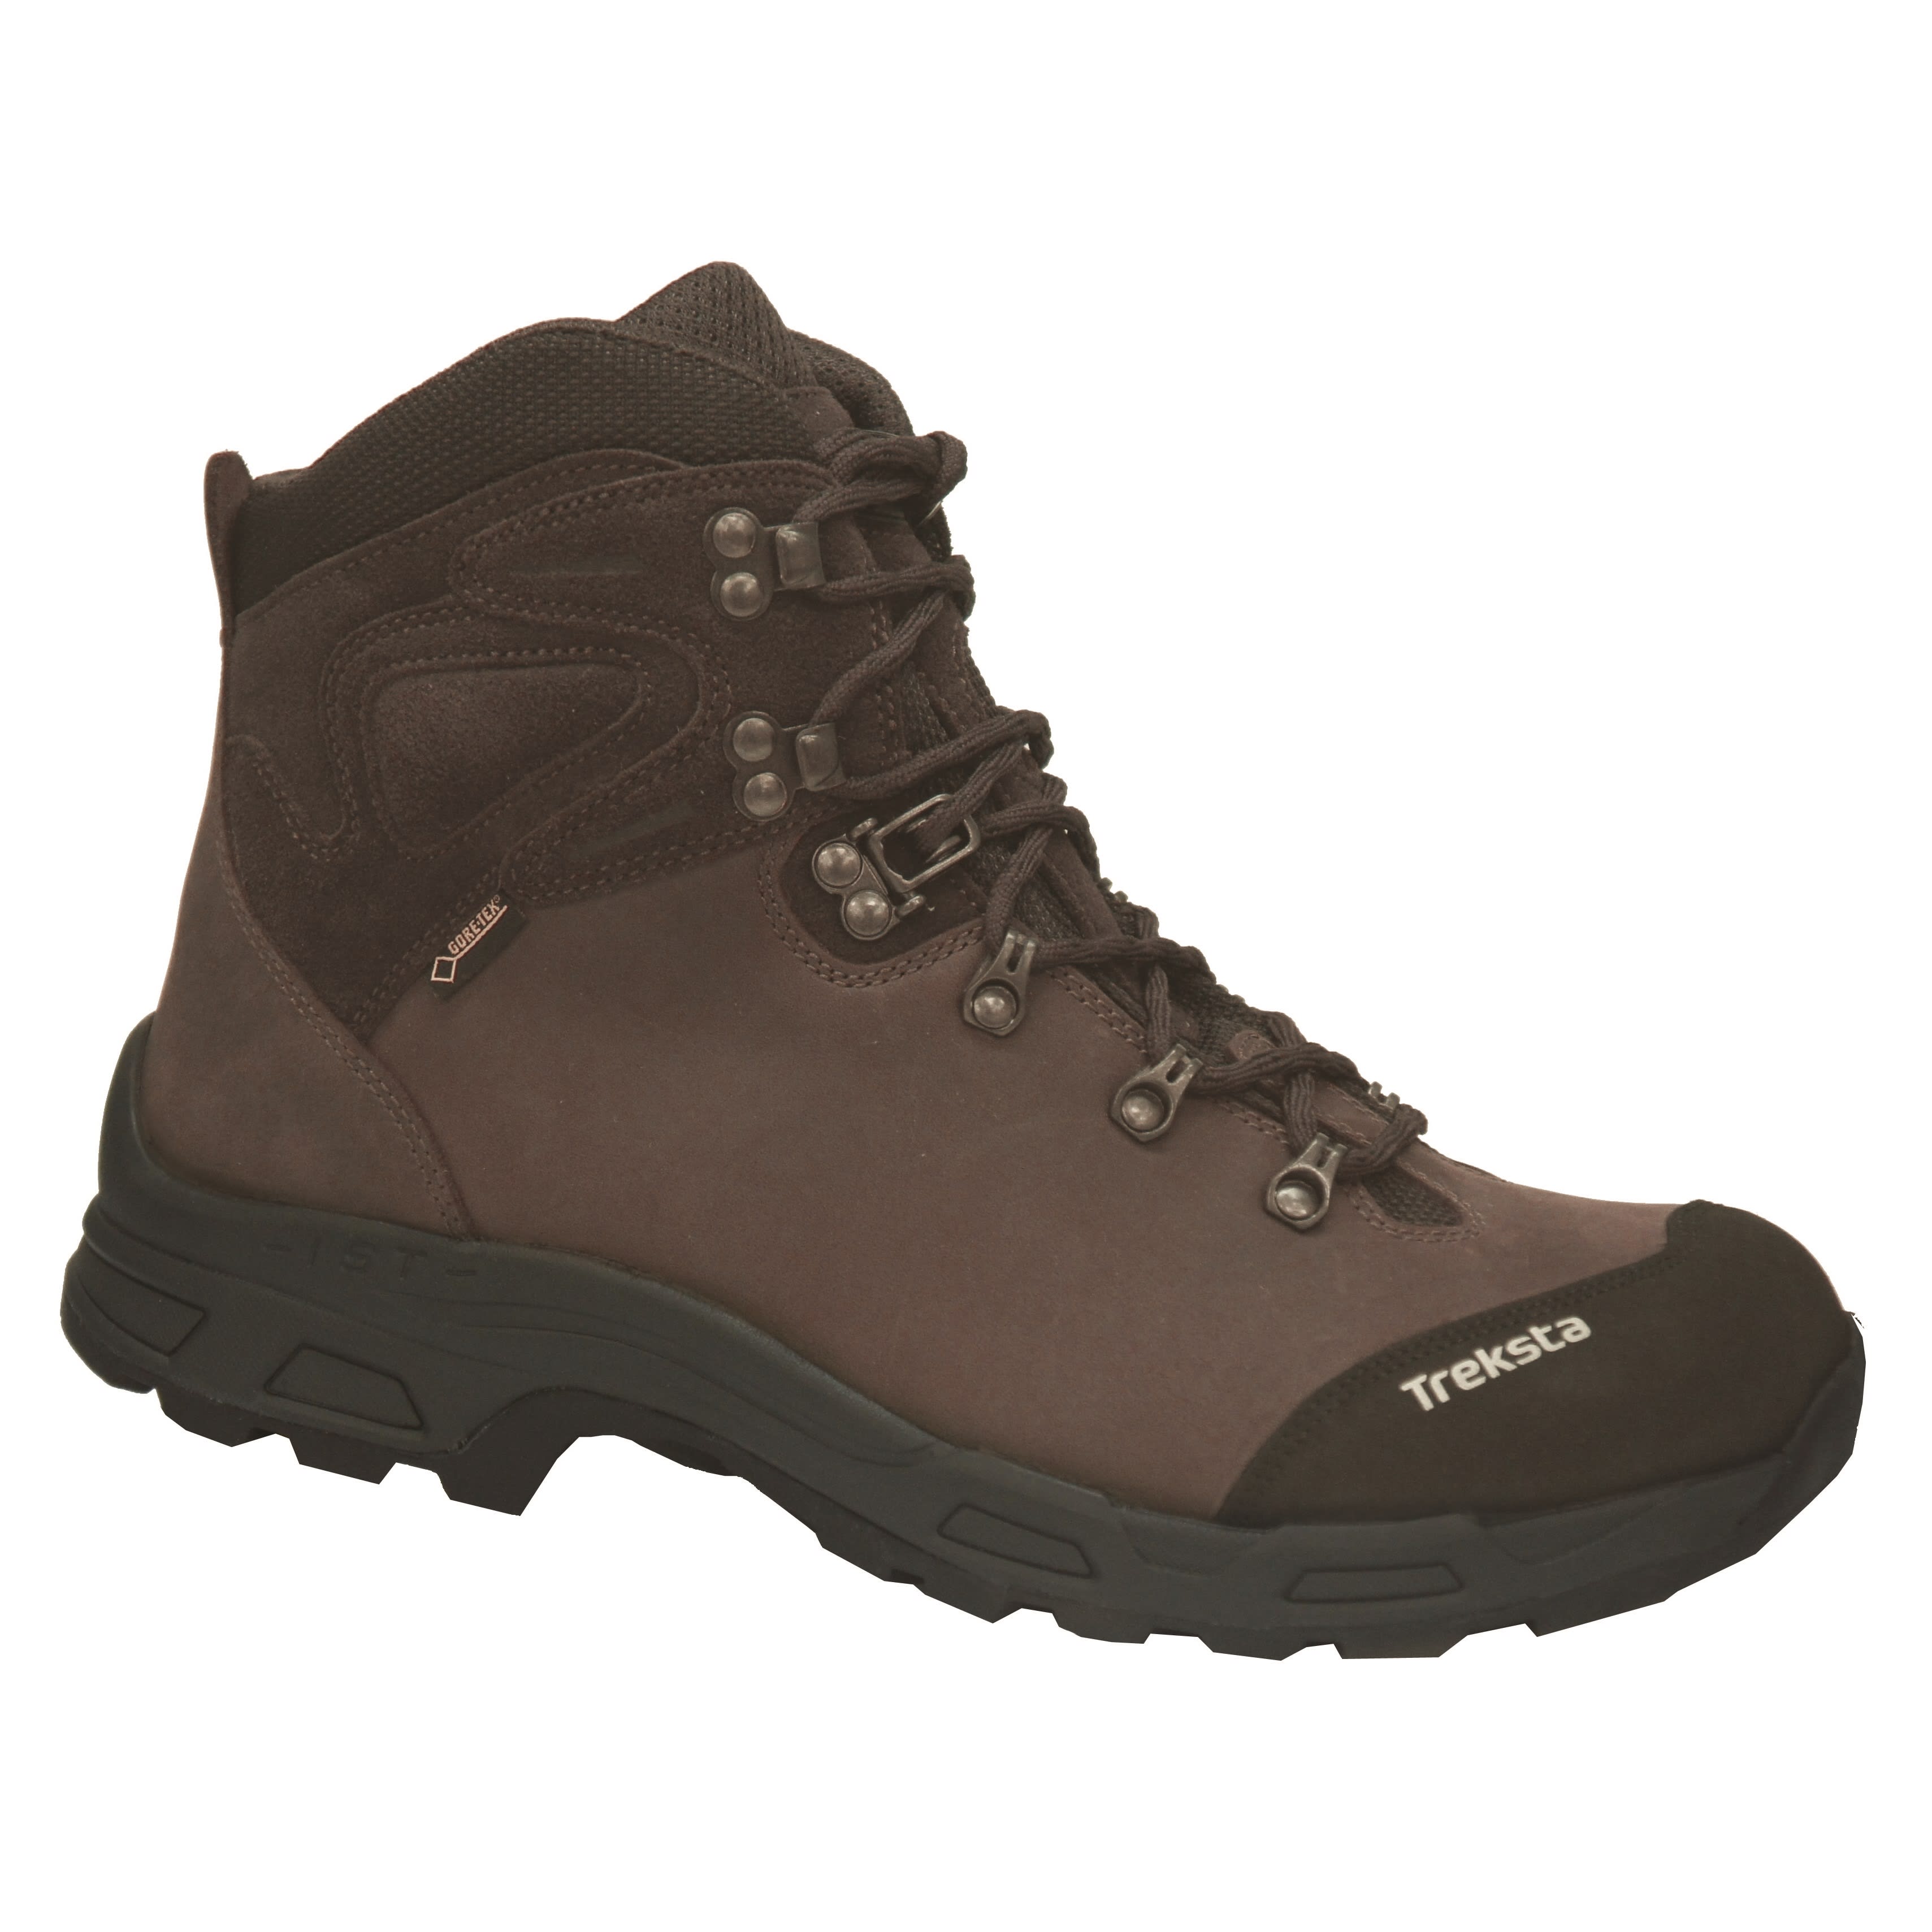 Buy TrekSta Onyx S6 Gore-Tex from Outnorth